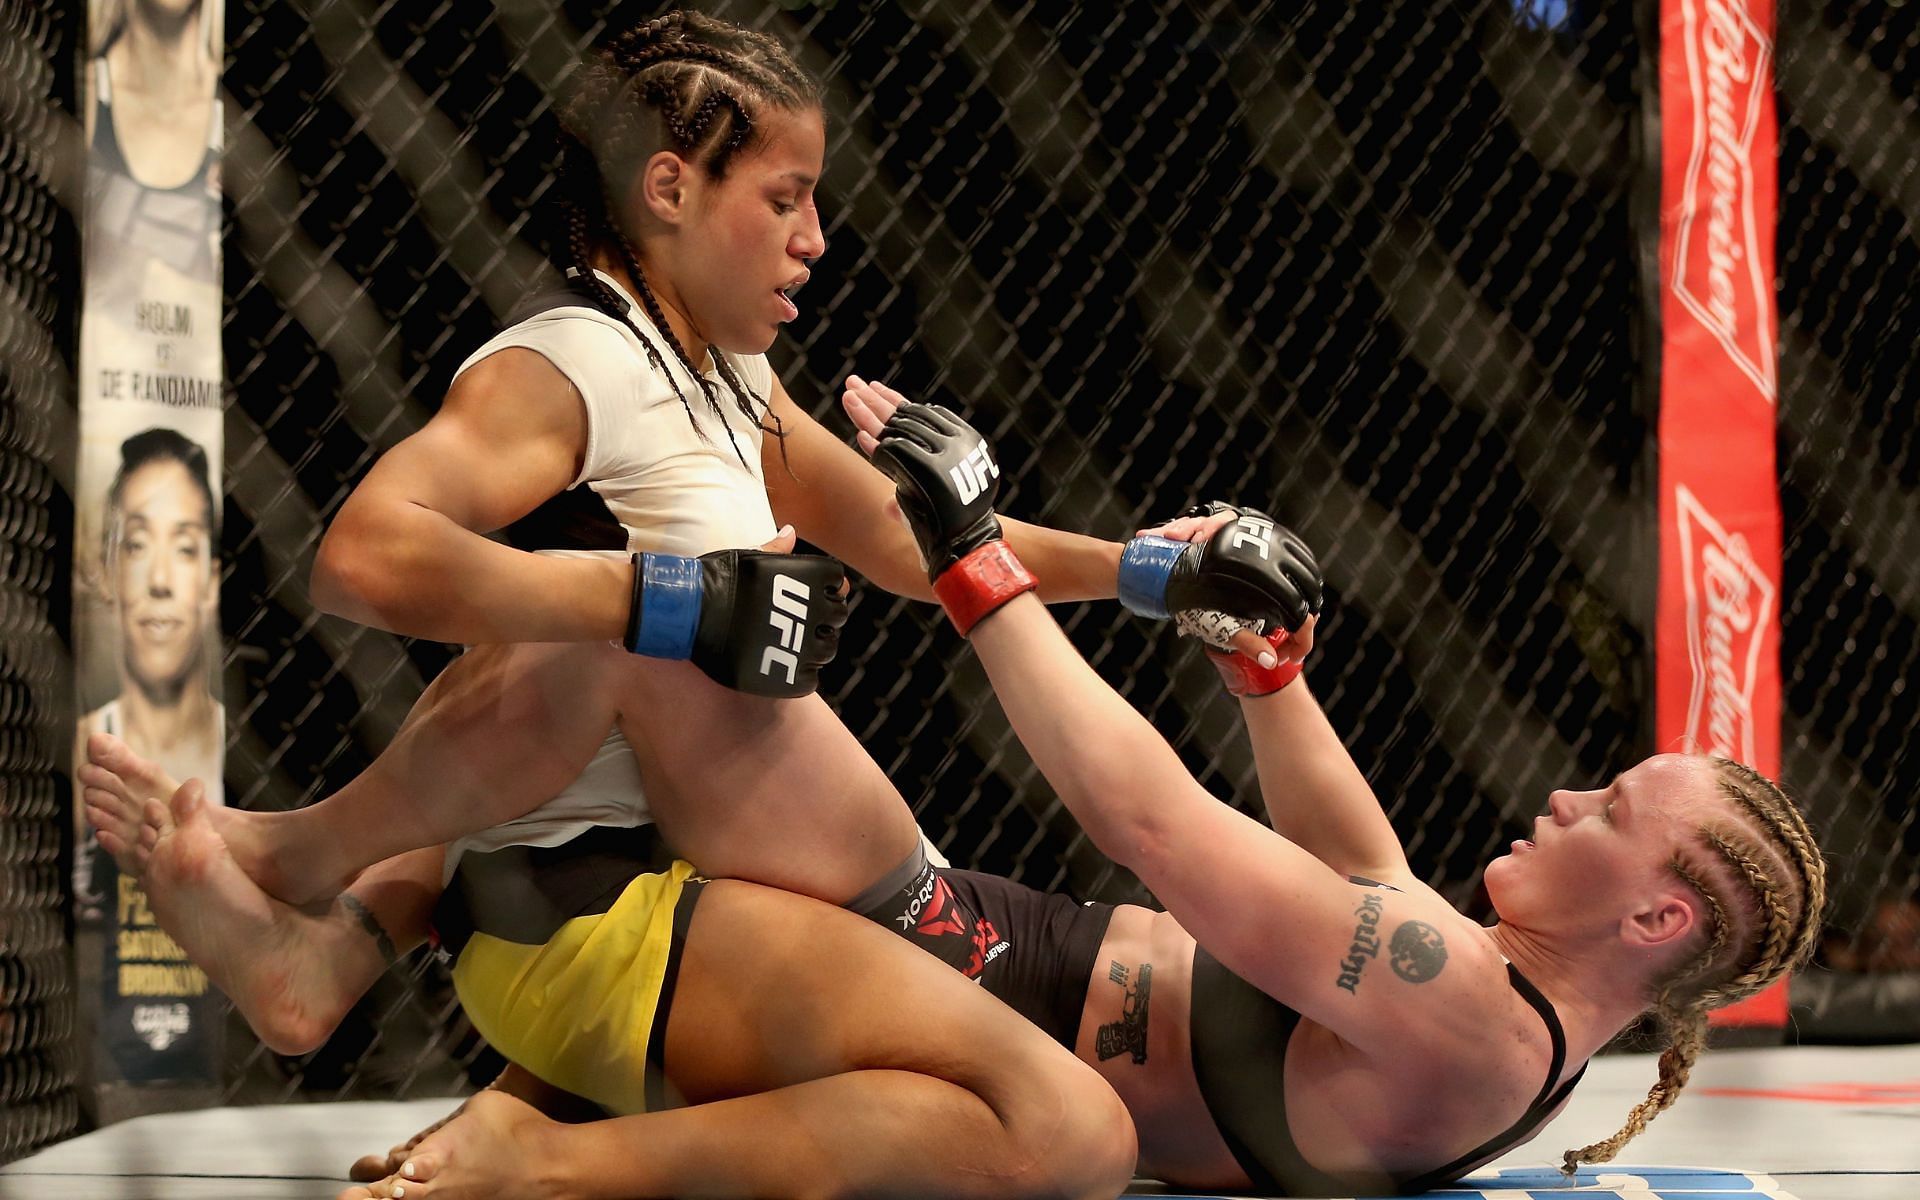 Julianna Pena (left) in action with Valentina Shevchenko (right) in January 2017